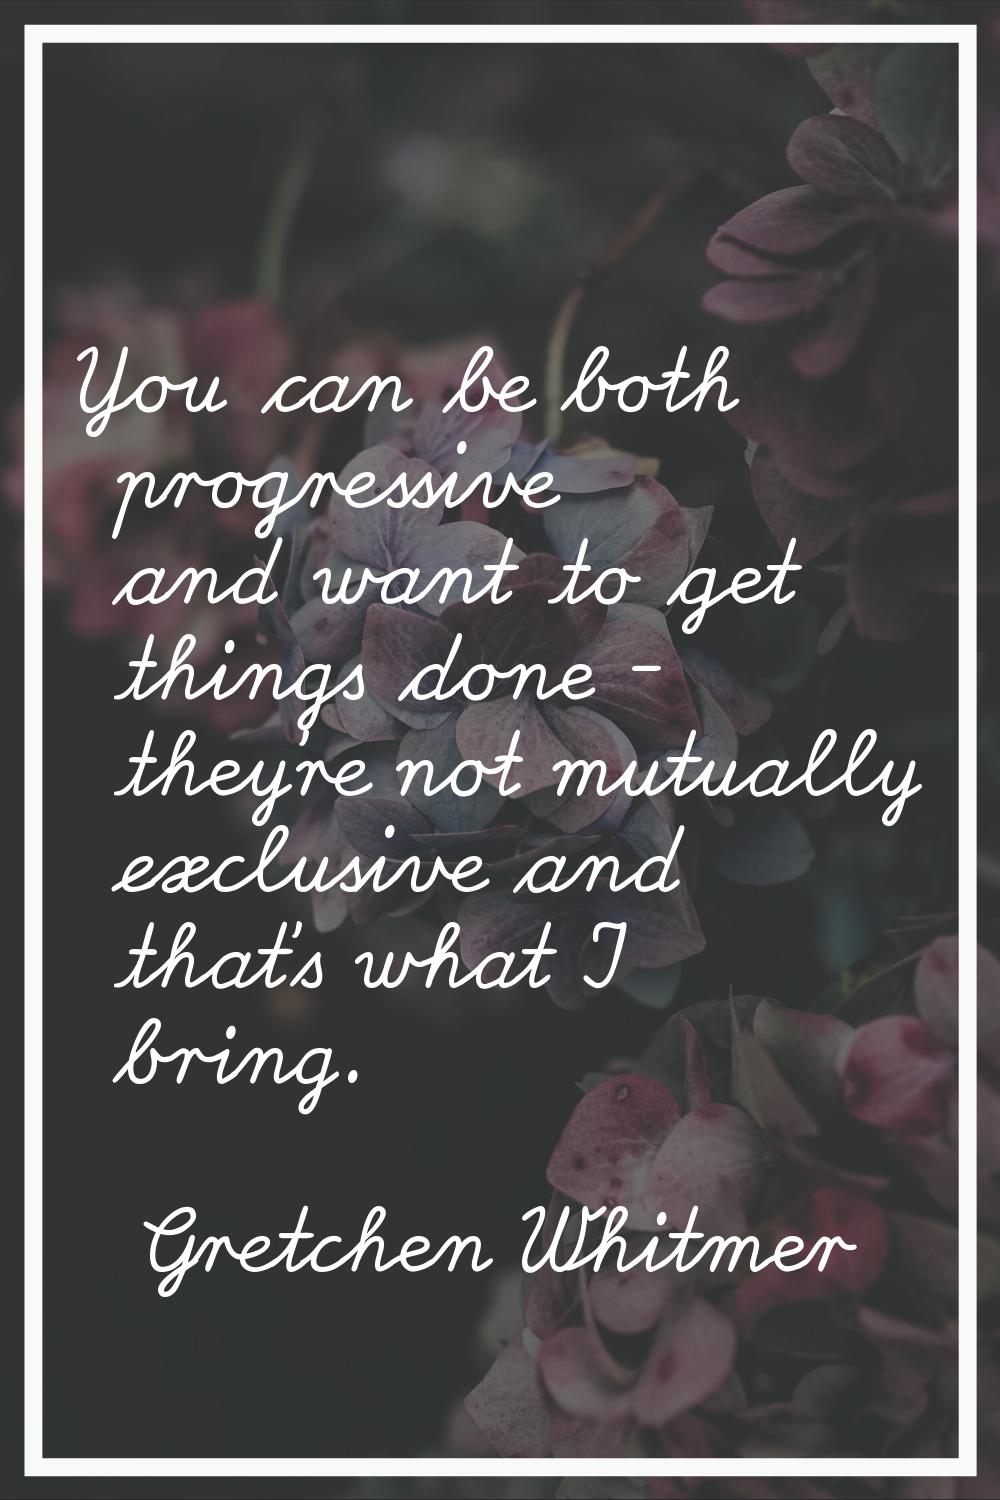 You can be both progressive and want to get things done - they're not mutually exclusive and that's